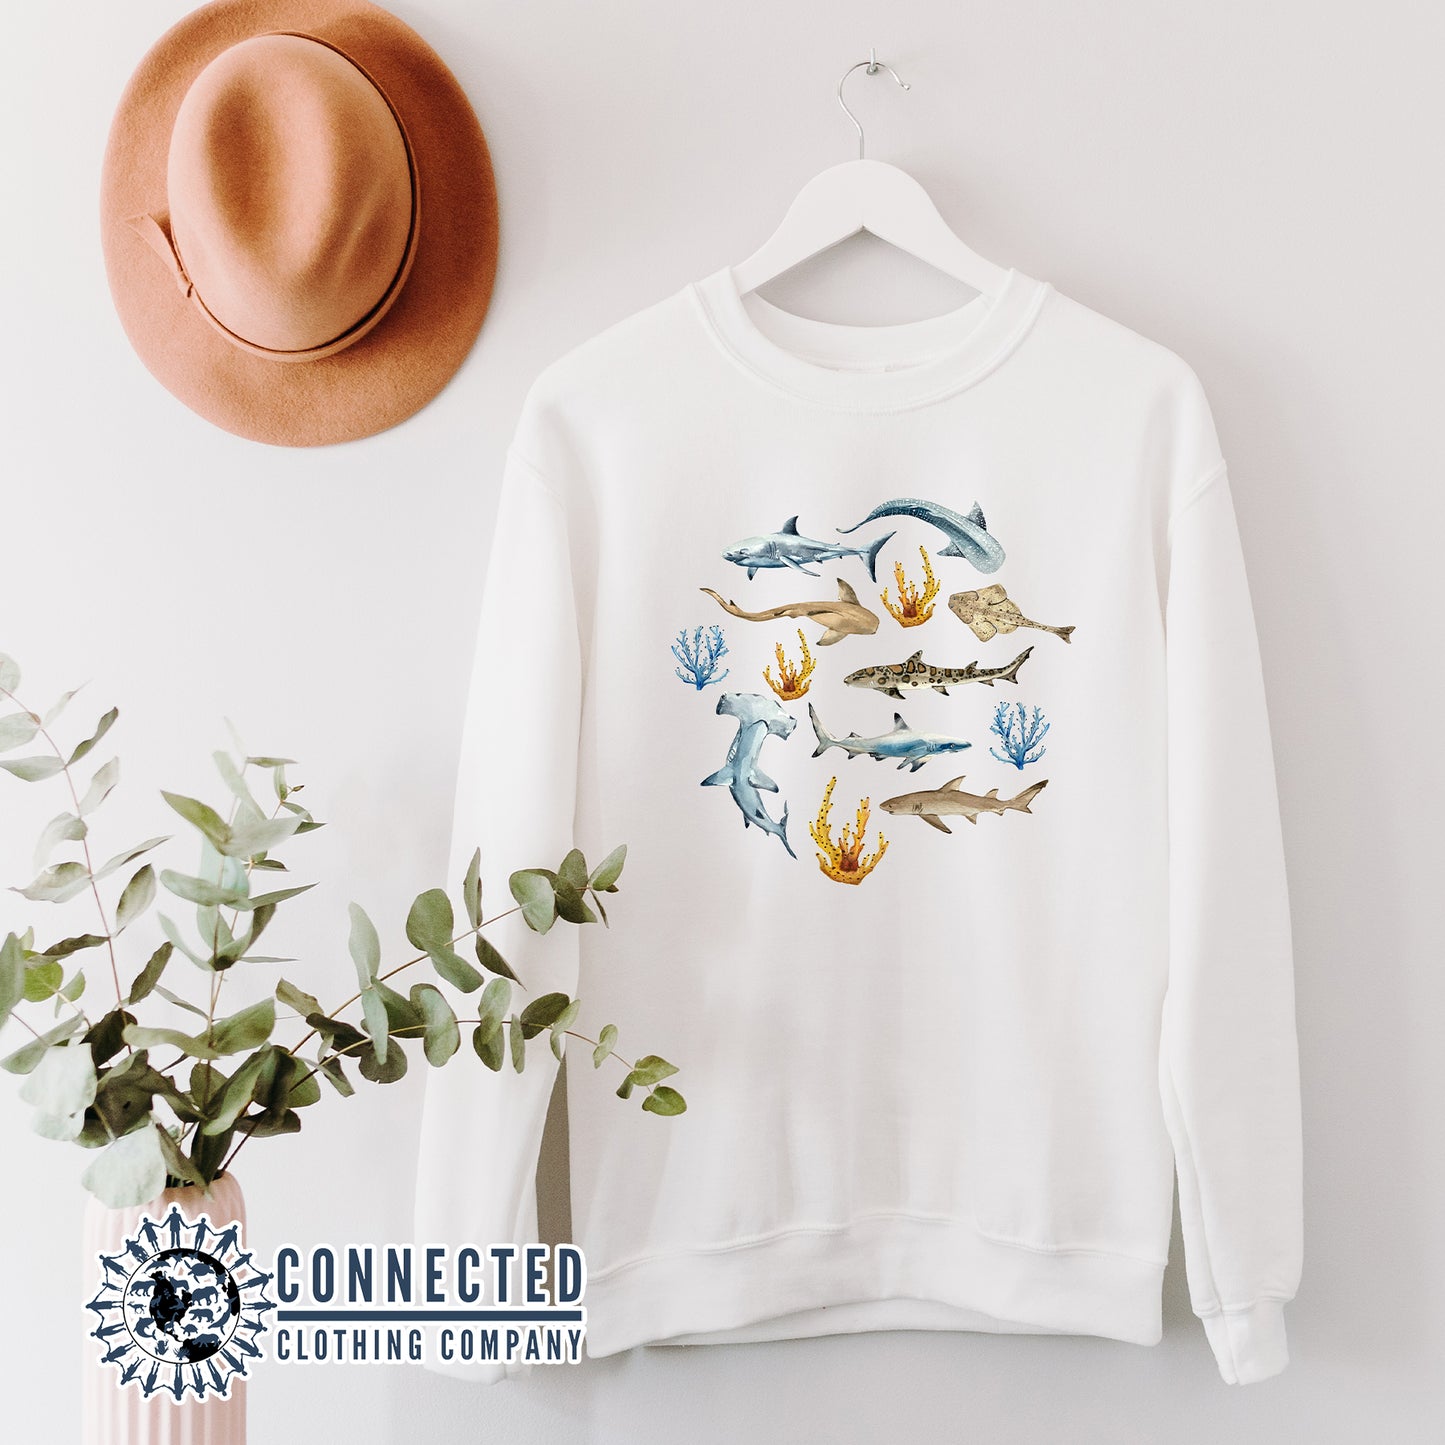 Hanging White Shark Ocean Watercolor Unisex Crewneck Sweatshirt - Connected Clothing Company - Ethically and Sustainably Made - 10% of profits donated to shark conservation and ocean conservation